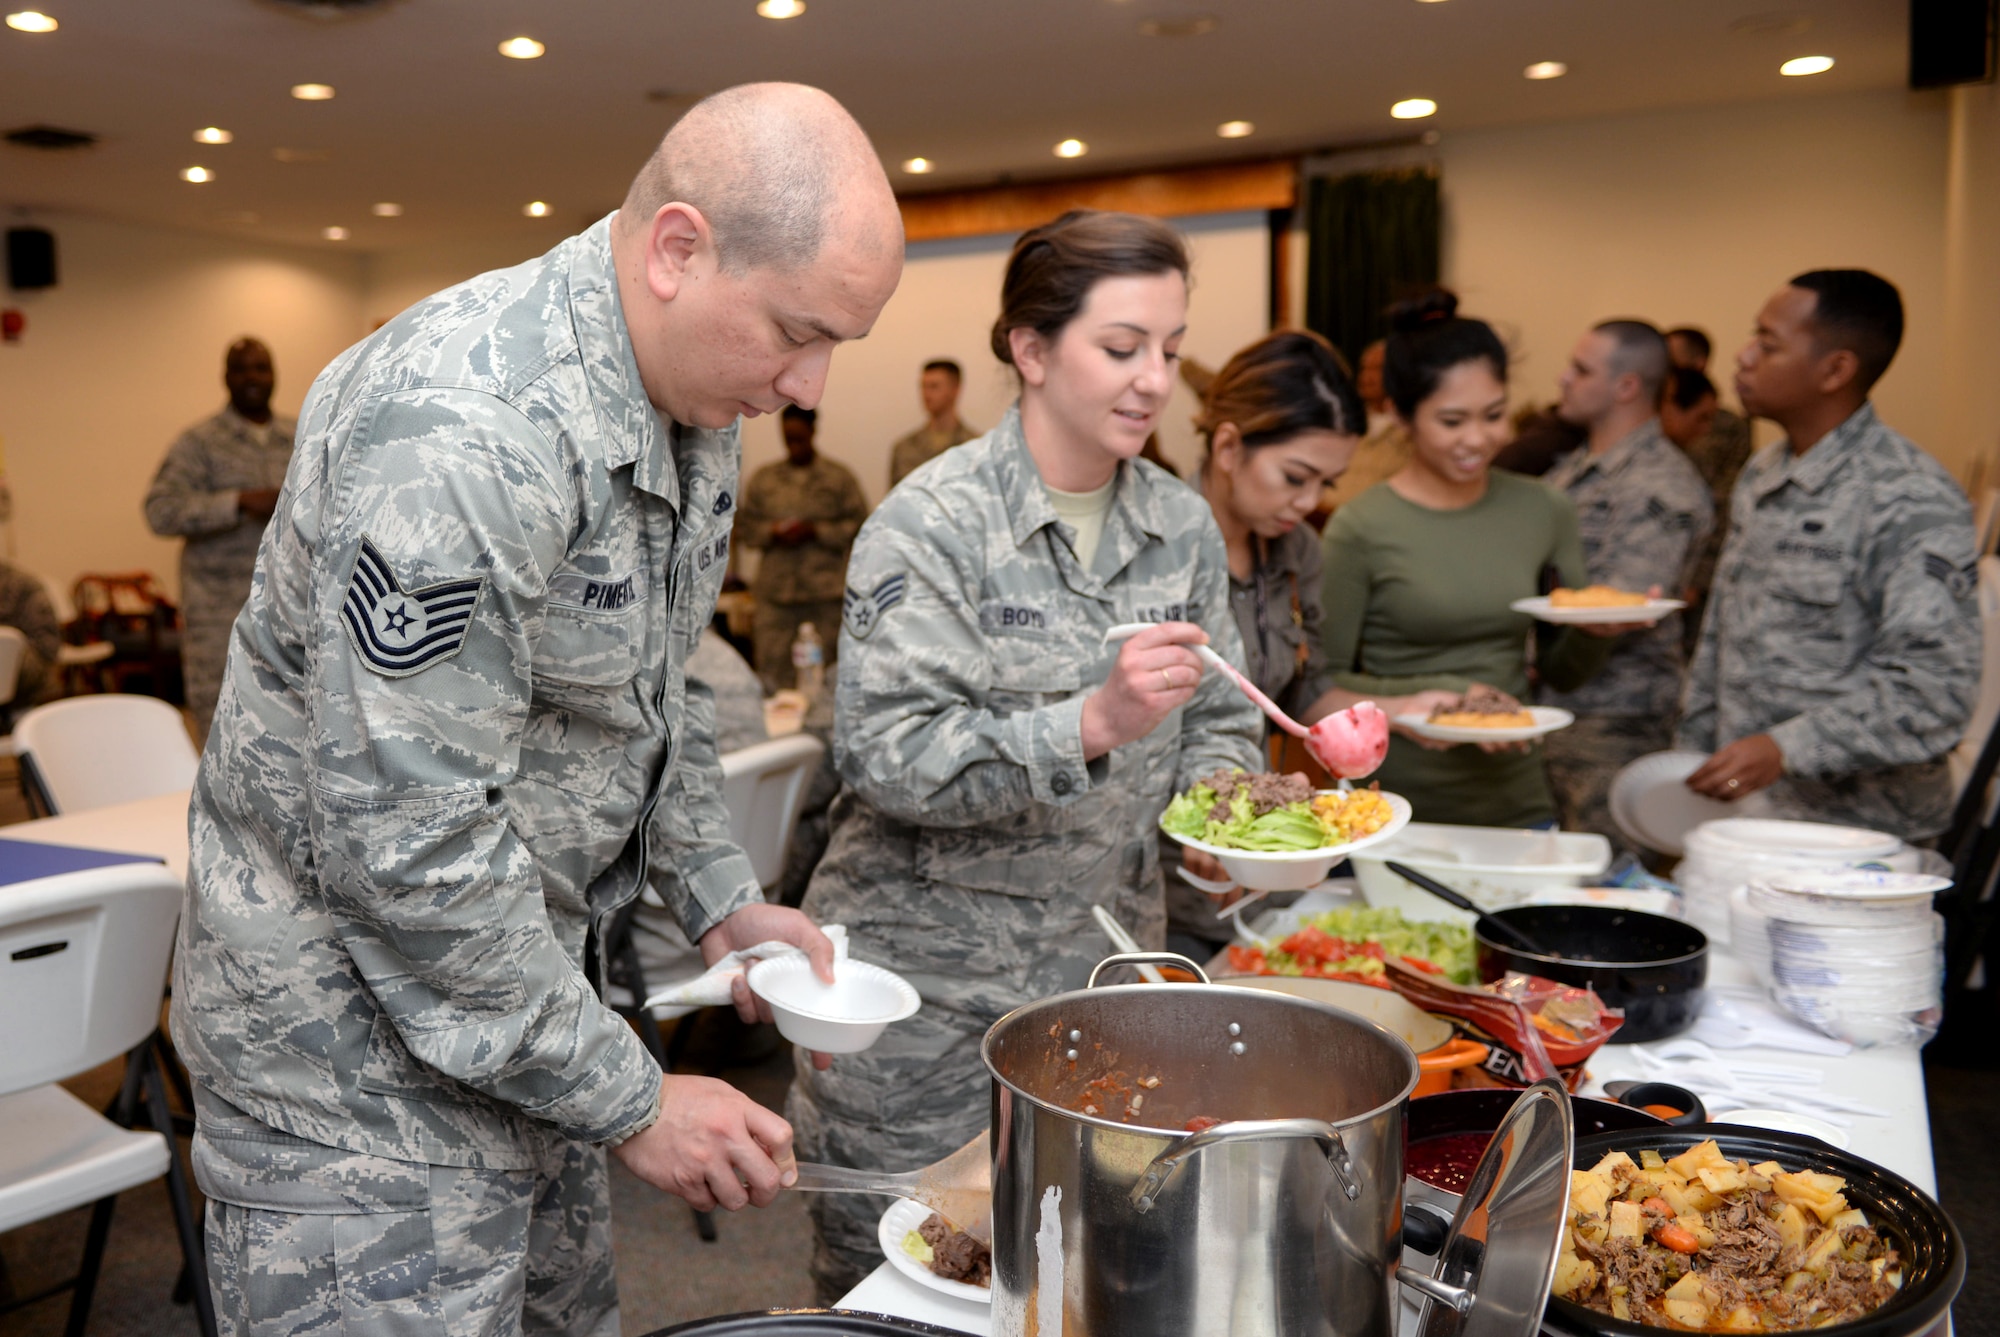 Airmen from the 28th Bomb Wing participate in a food tasting and storytelling event during national Native American Heritage Month at Ellsworth Air Force Base, S.D., Nov. 10, 2016. Many of the dishes served were traditional Native American dishes, including hominy, fry bread, and blue corn mush. (U.S. Air Fore photo by Airman 1st Class Denise M. Jenson)